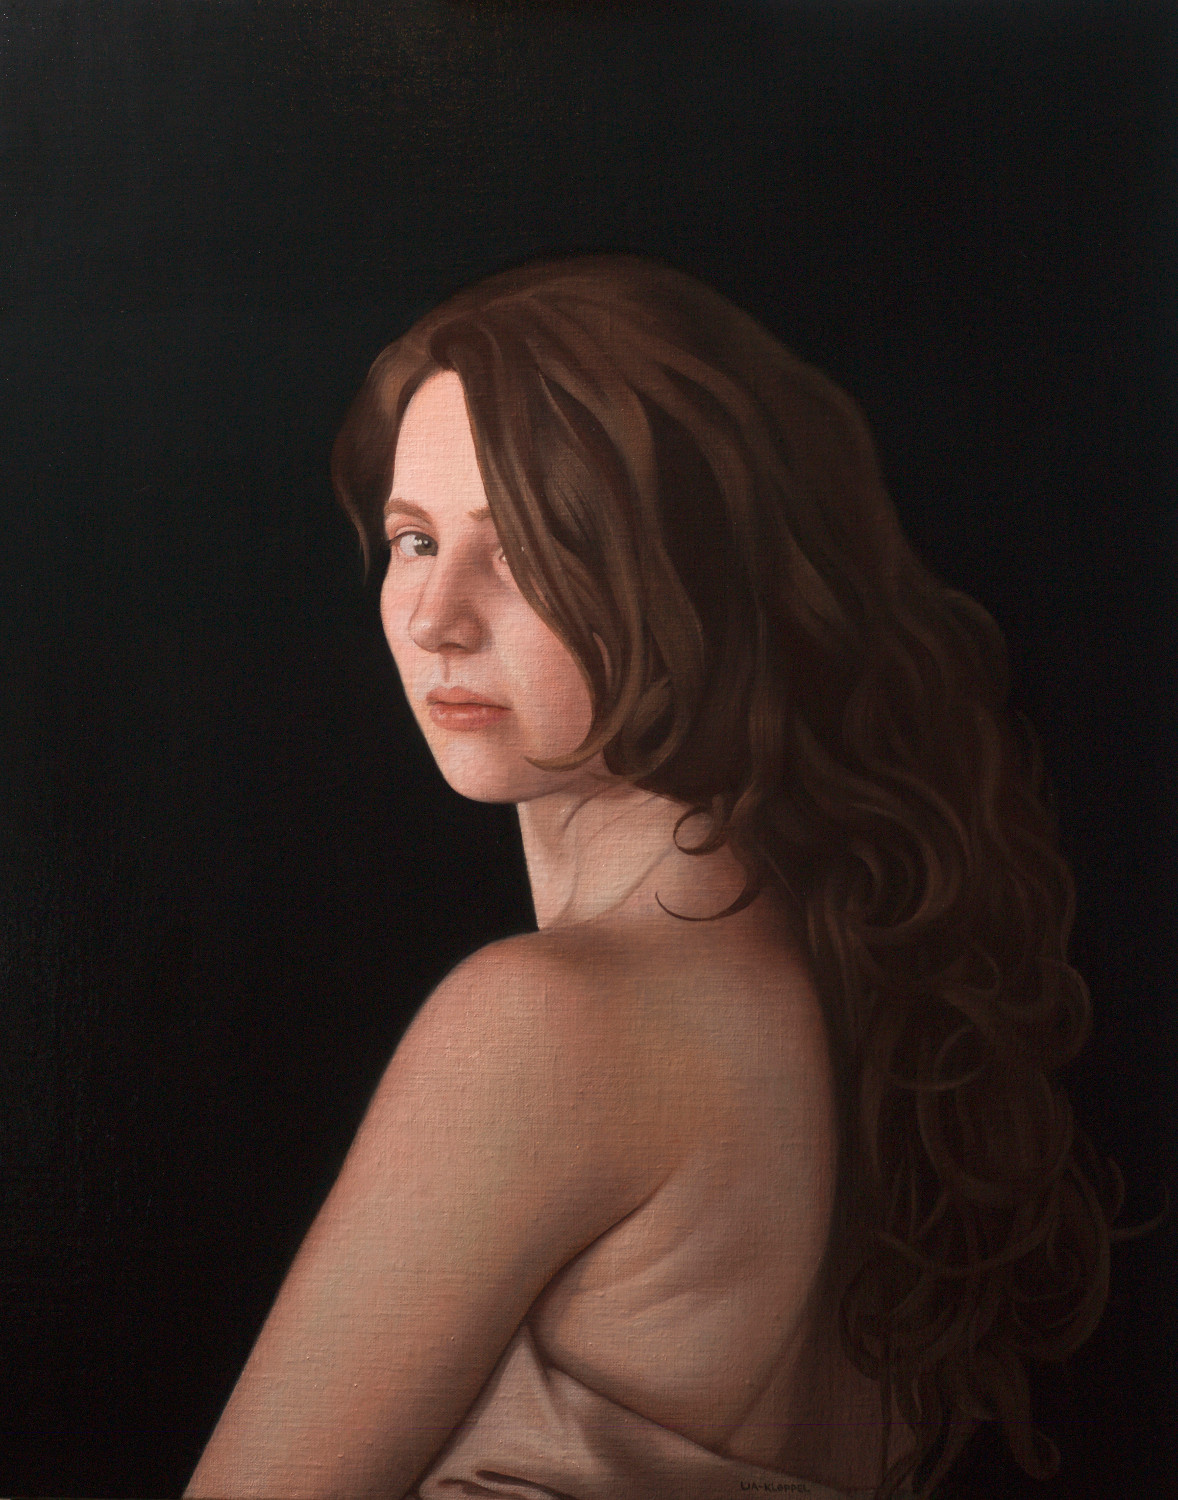   Susanna , 2015, Oil on linen, 24 x 20 inches, Private collection 